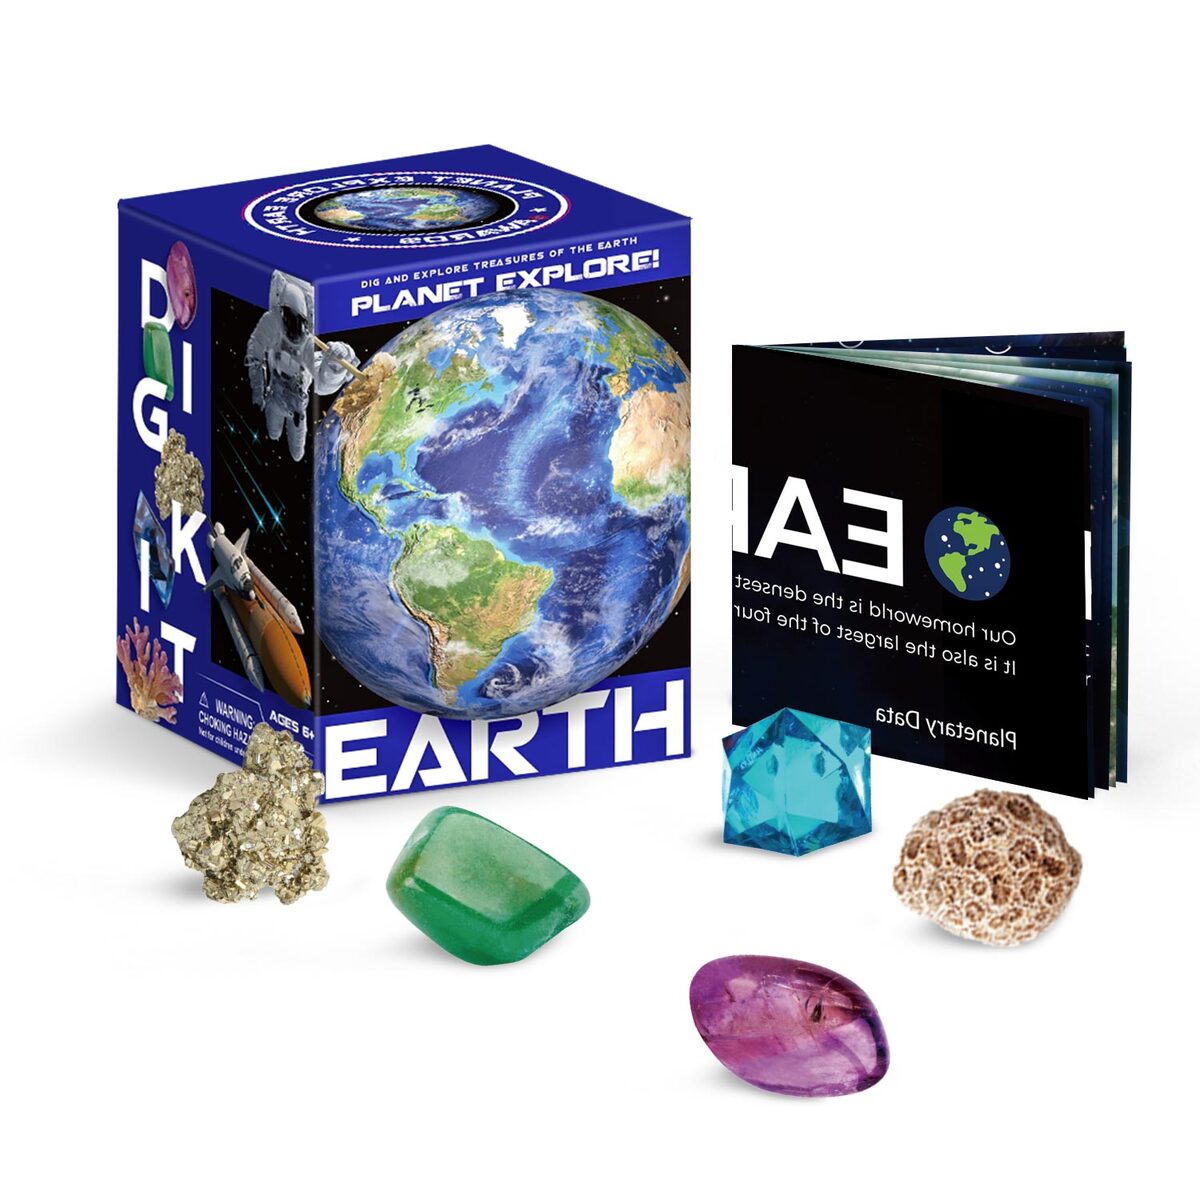 Excavate and Learn - Geology Kit